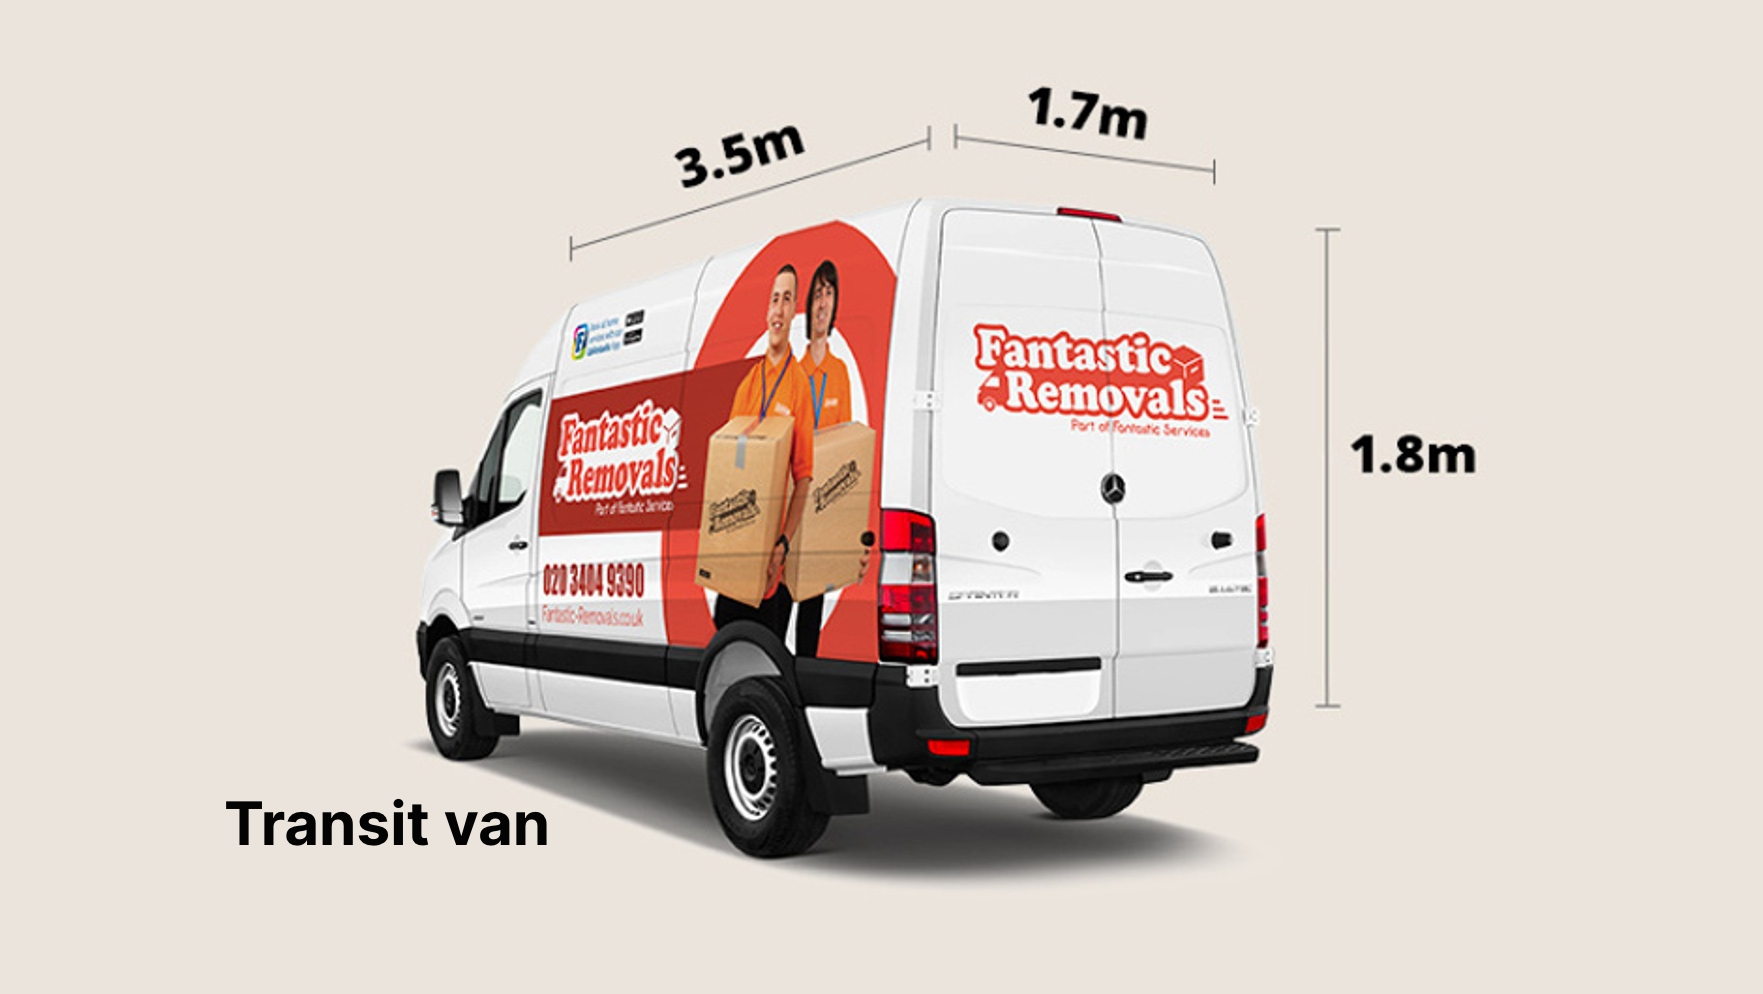 The image shows a photo of a branded Fantastic Services transit van and its dimensions.